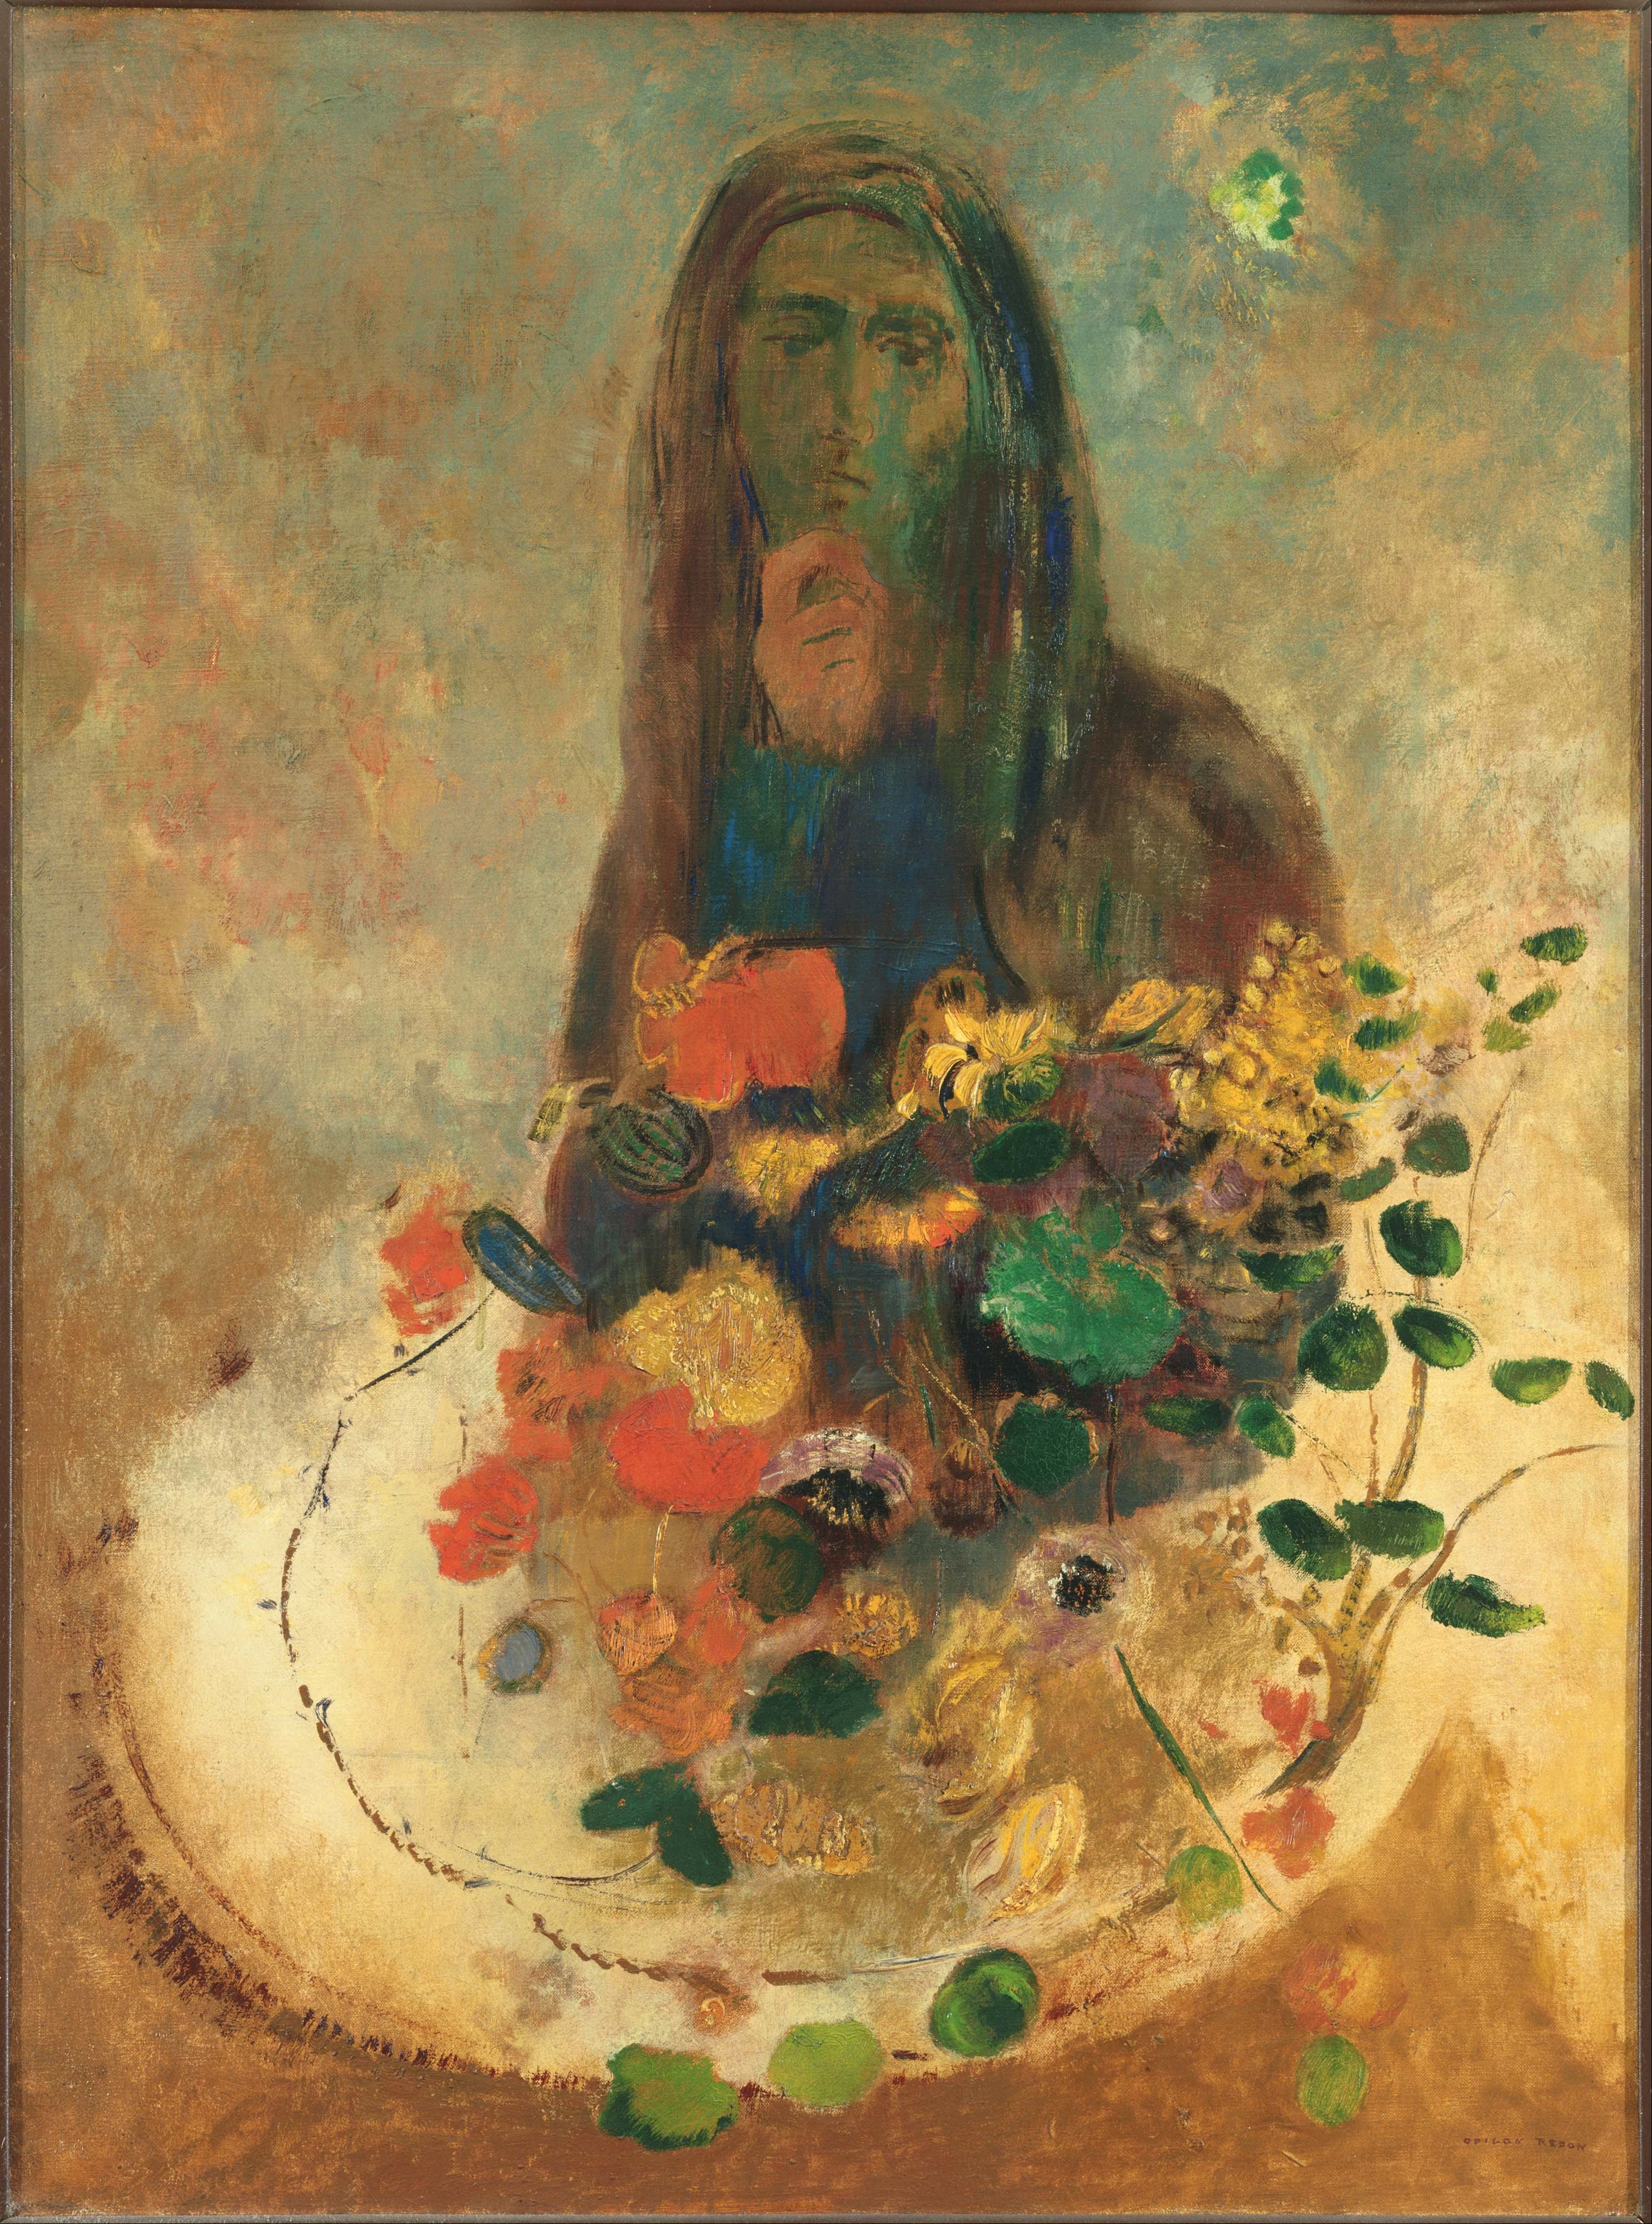 Mystery by Odilon Redon - circa 1910 - 21.38 x 28.75 in The Phillips Collection